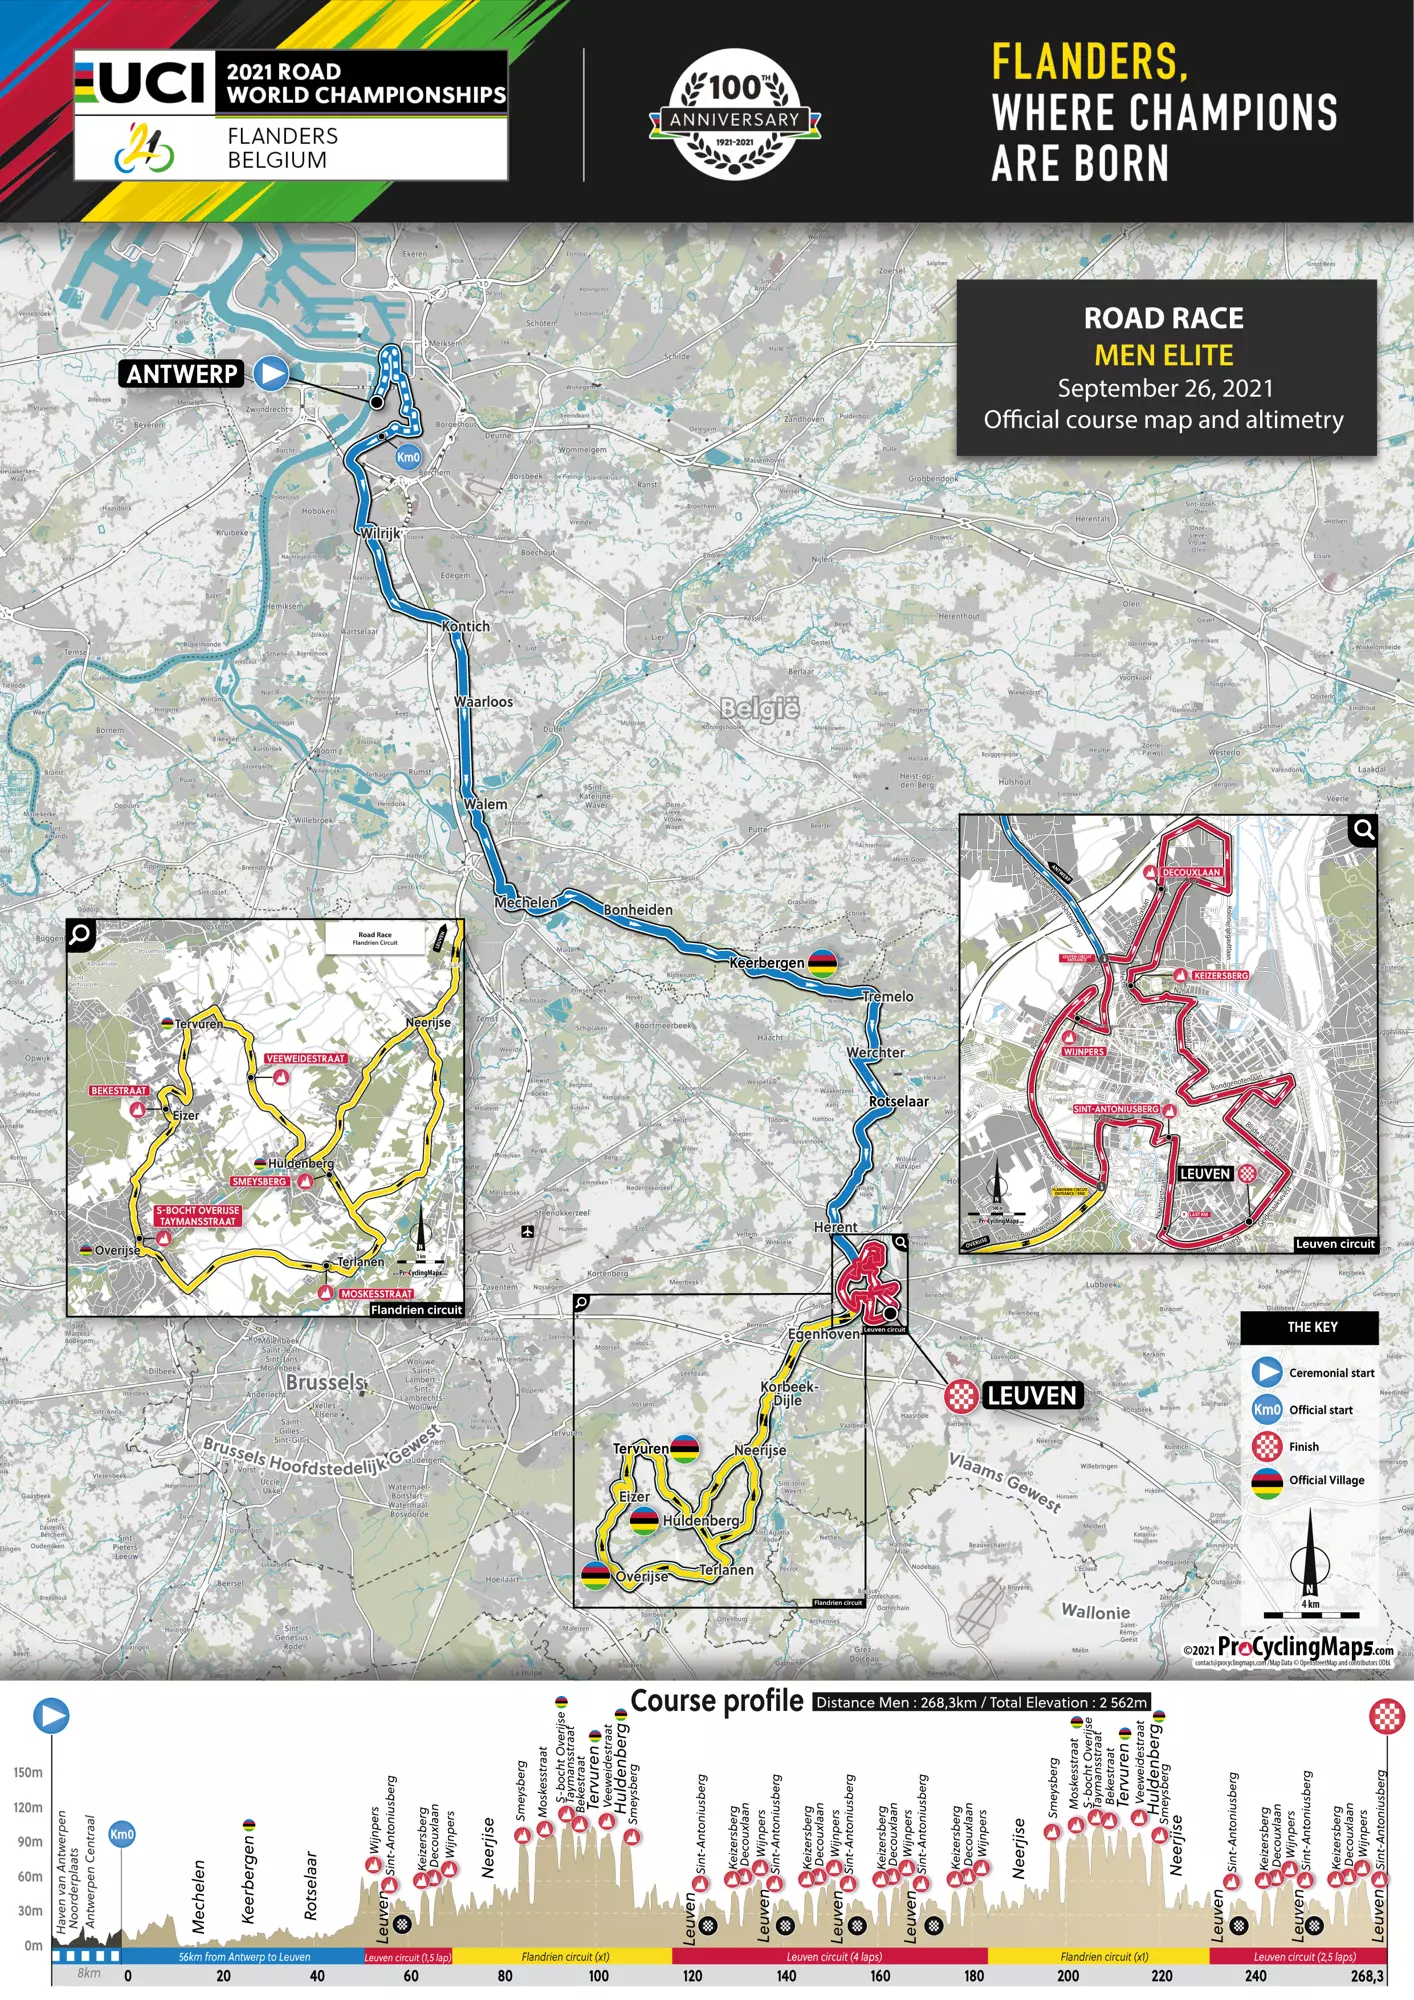 The men’s route and profile for the 2021 road race